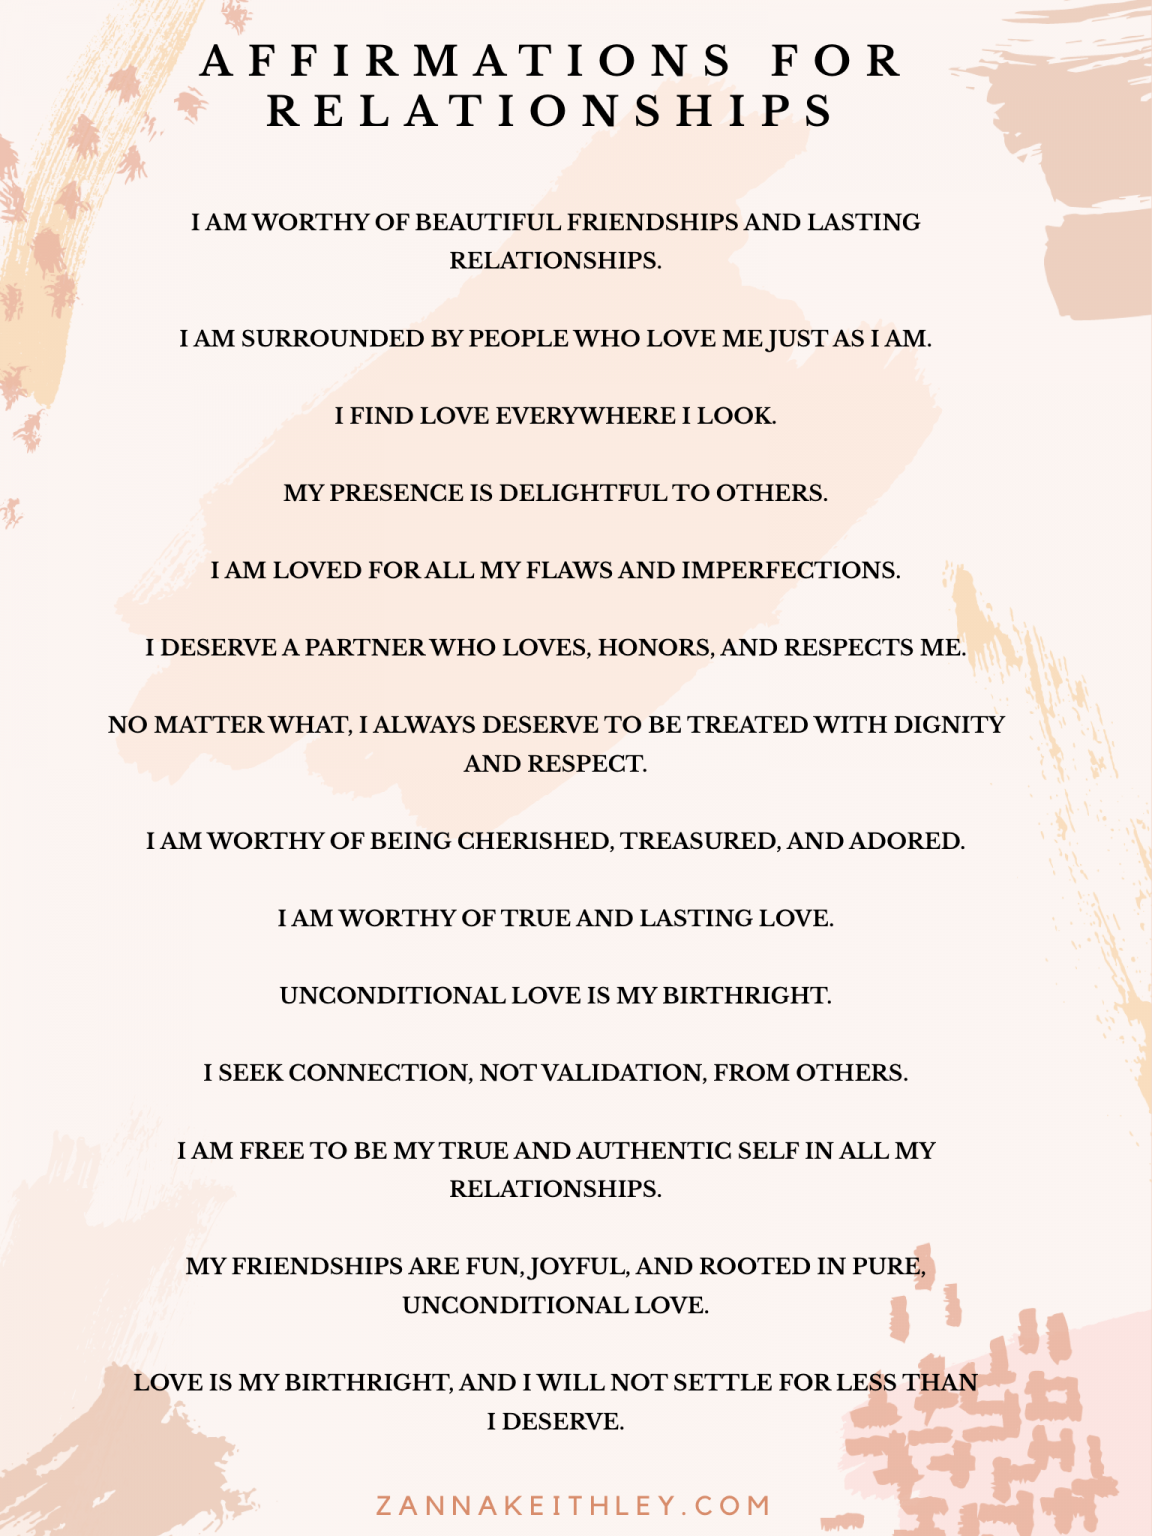 100 Positive Affirmations for Women - Zanna Keithley